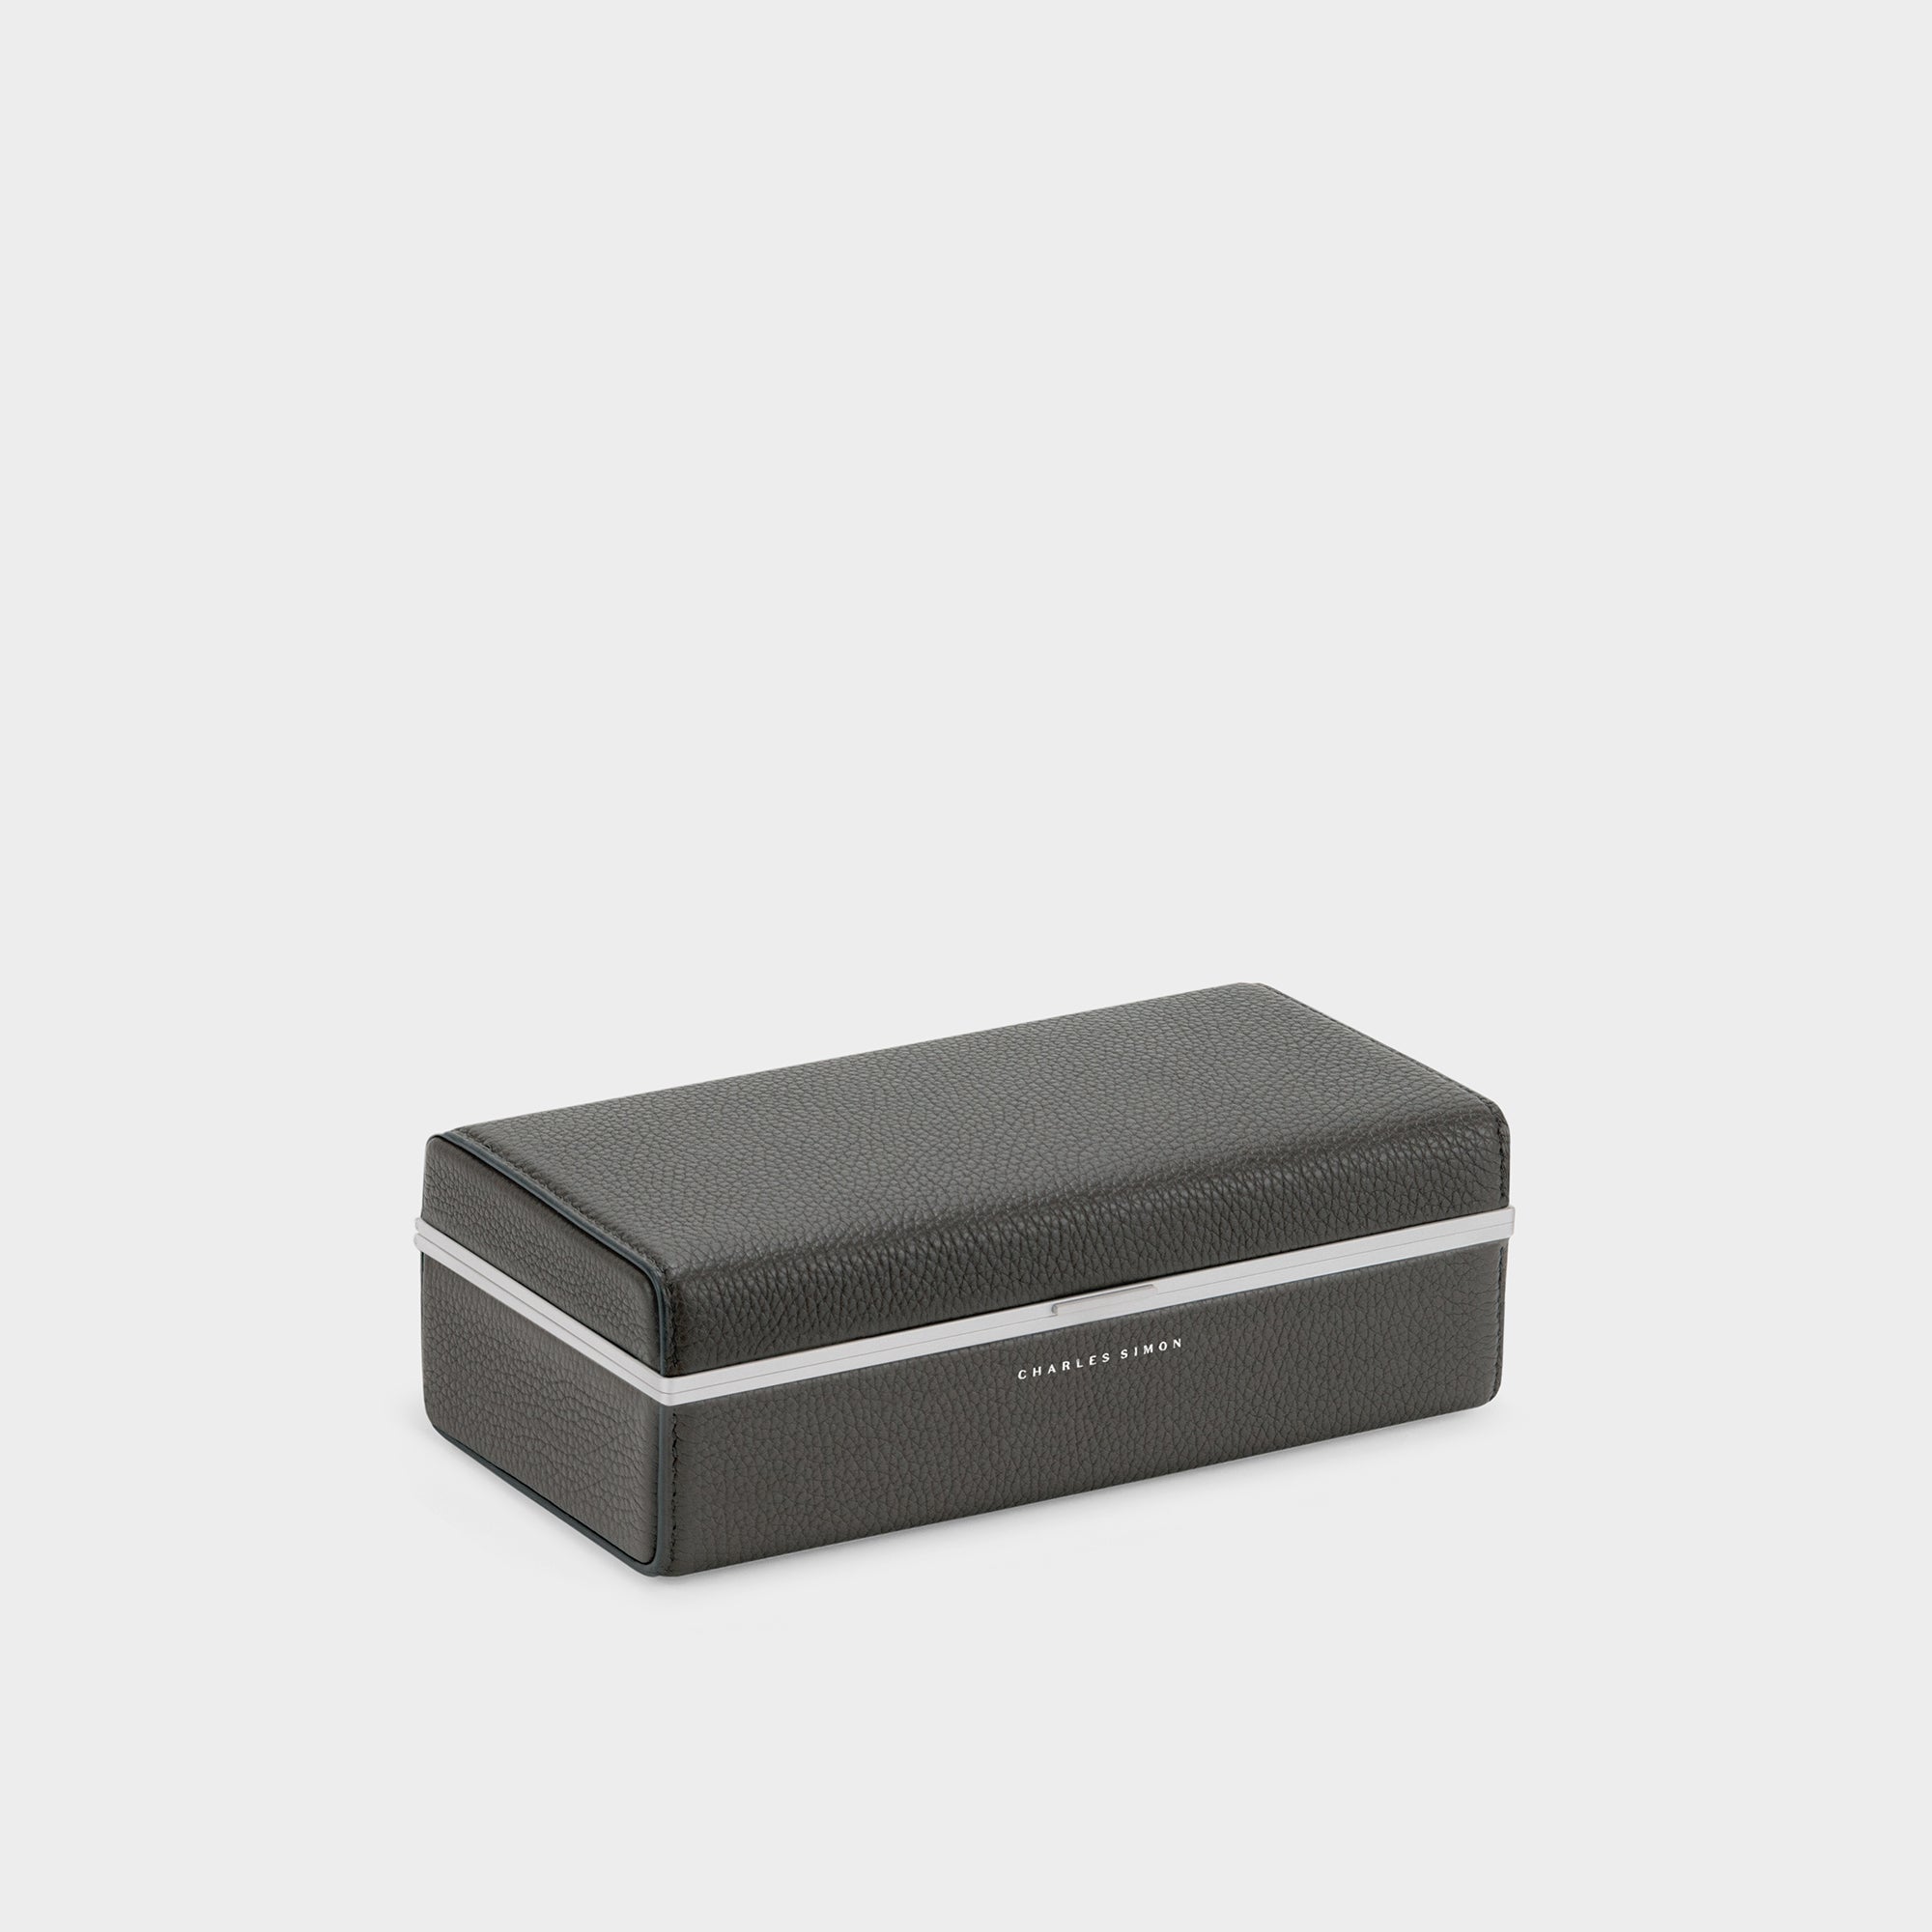 Charles Simon Eaton 3 watch case in graphite made from anodized aluminum and refined young bull leather